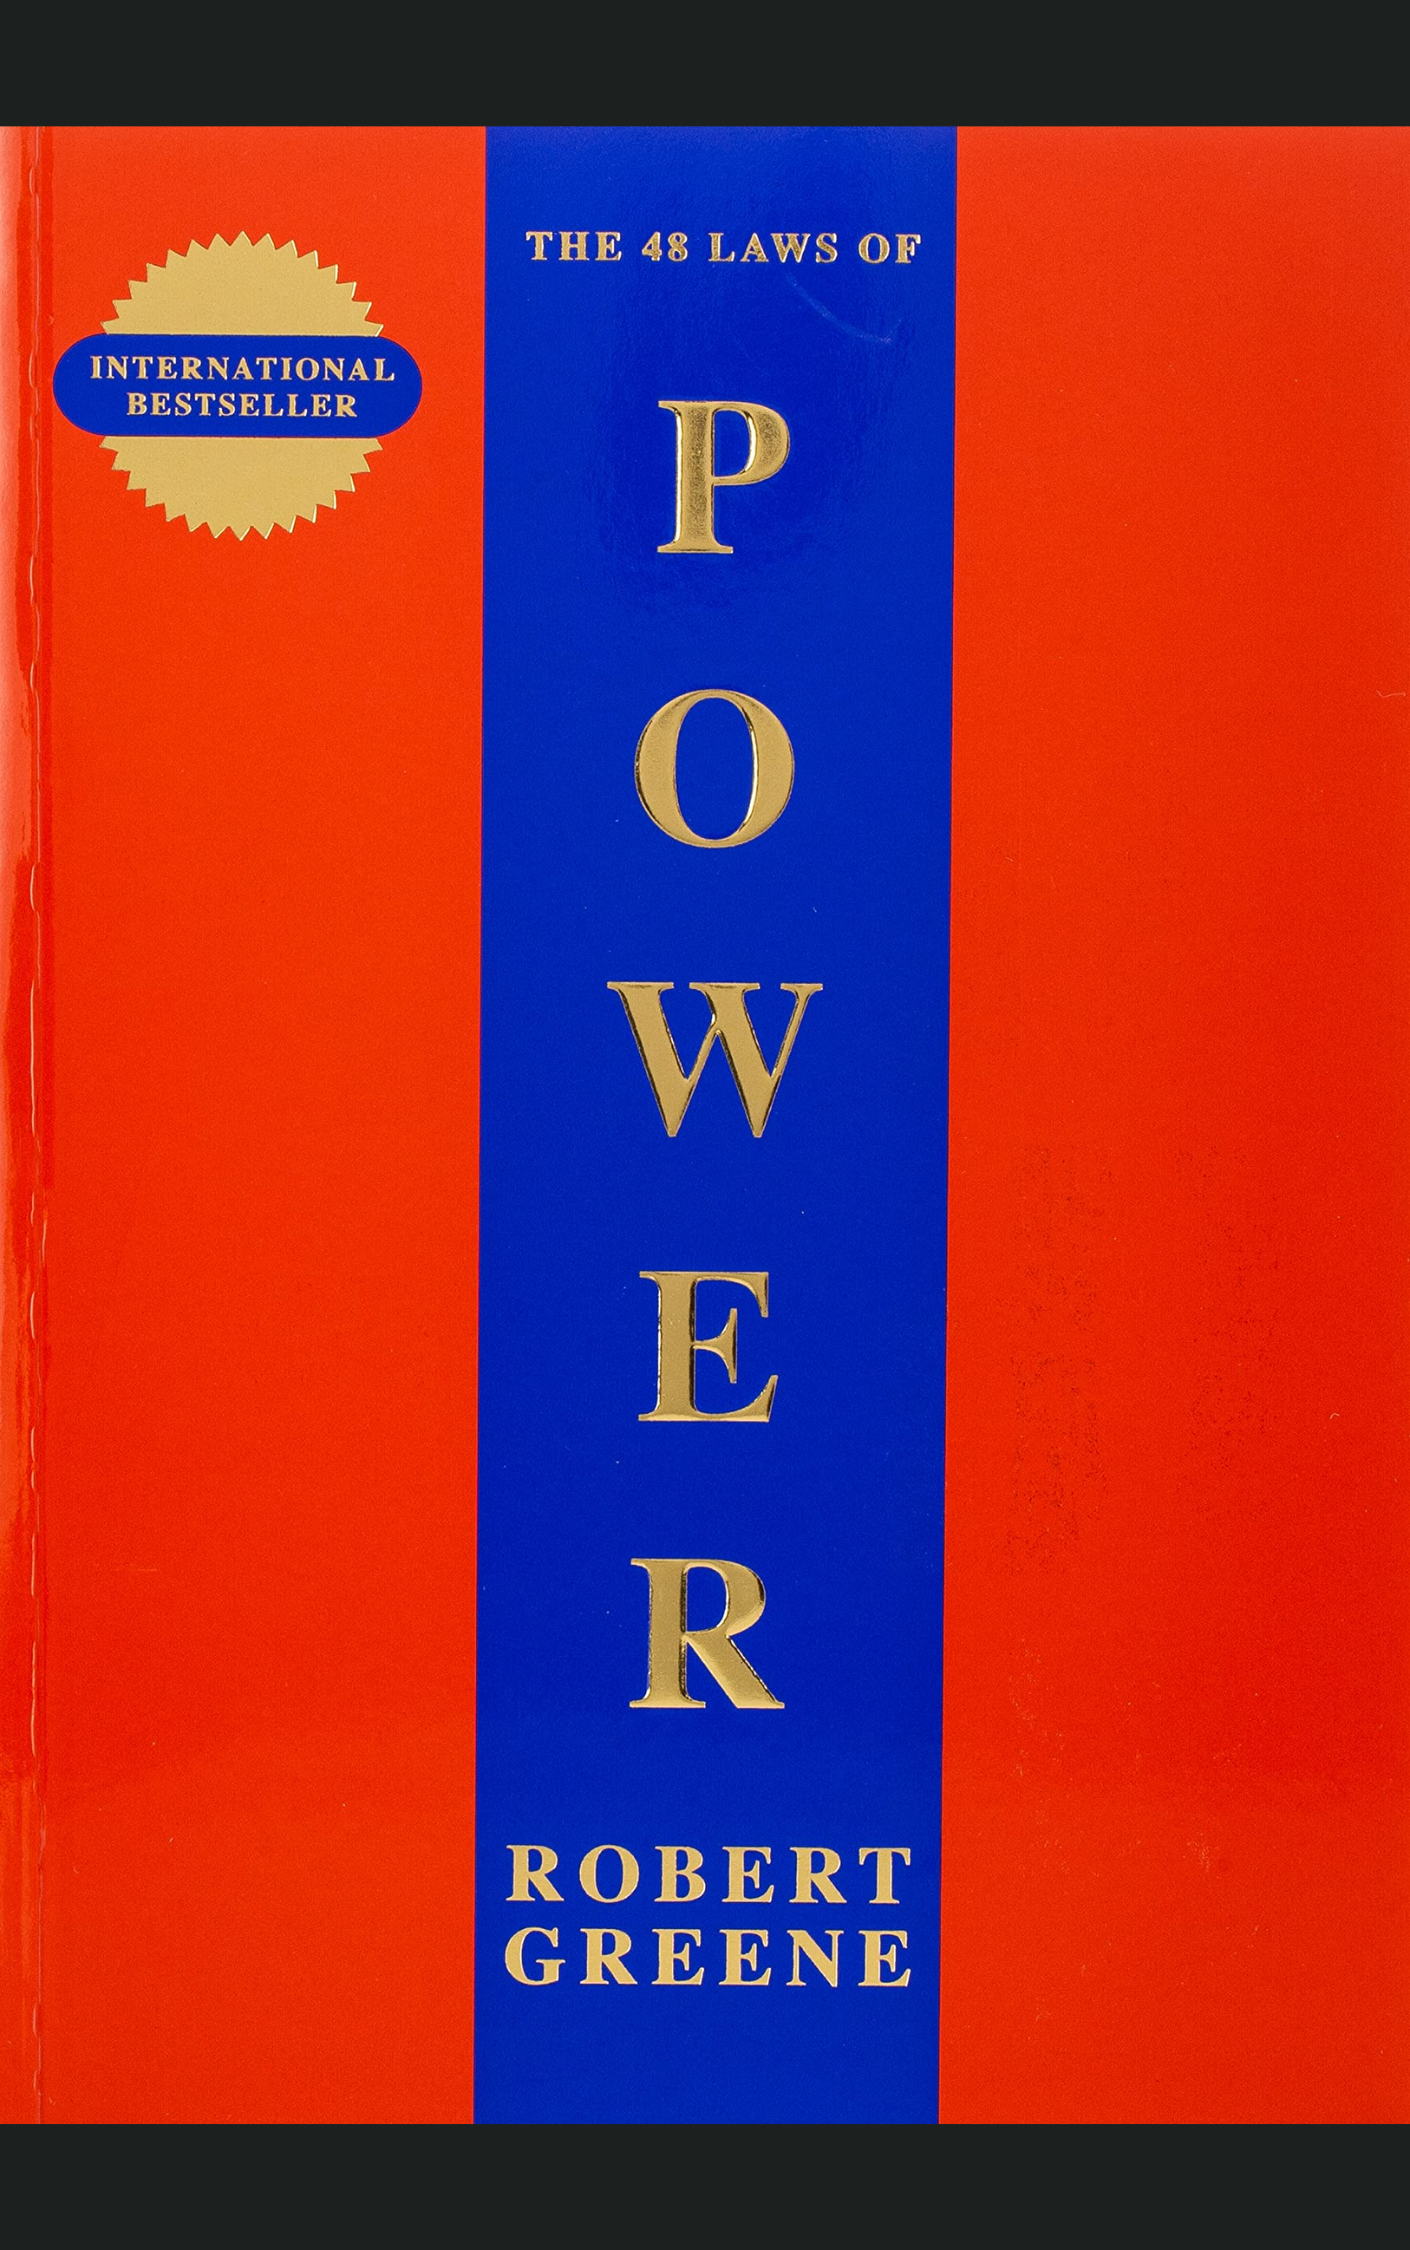 THE 48 LAWS OF POWER by ROBERT GREENE